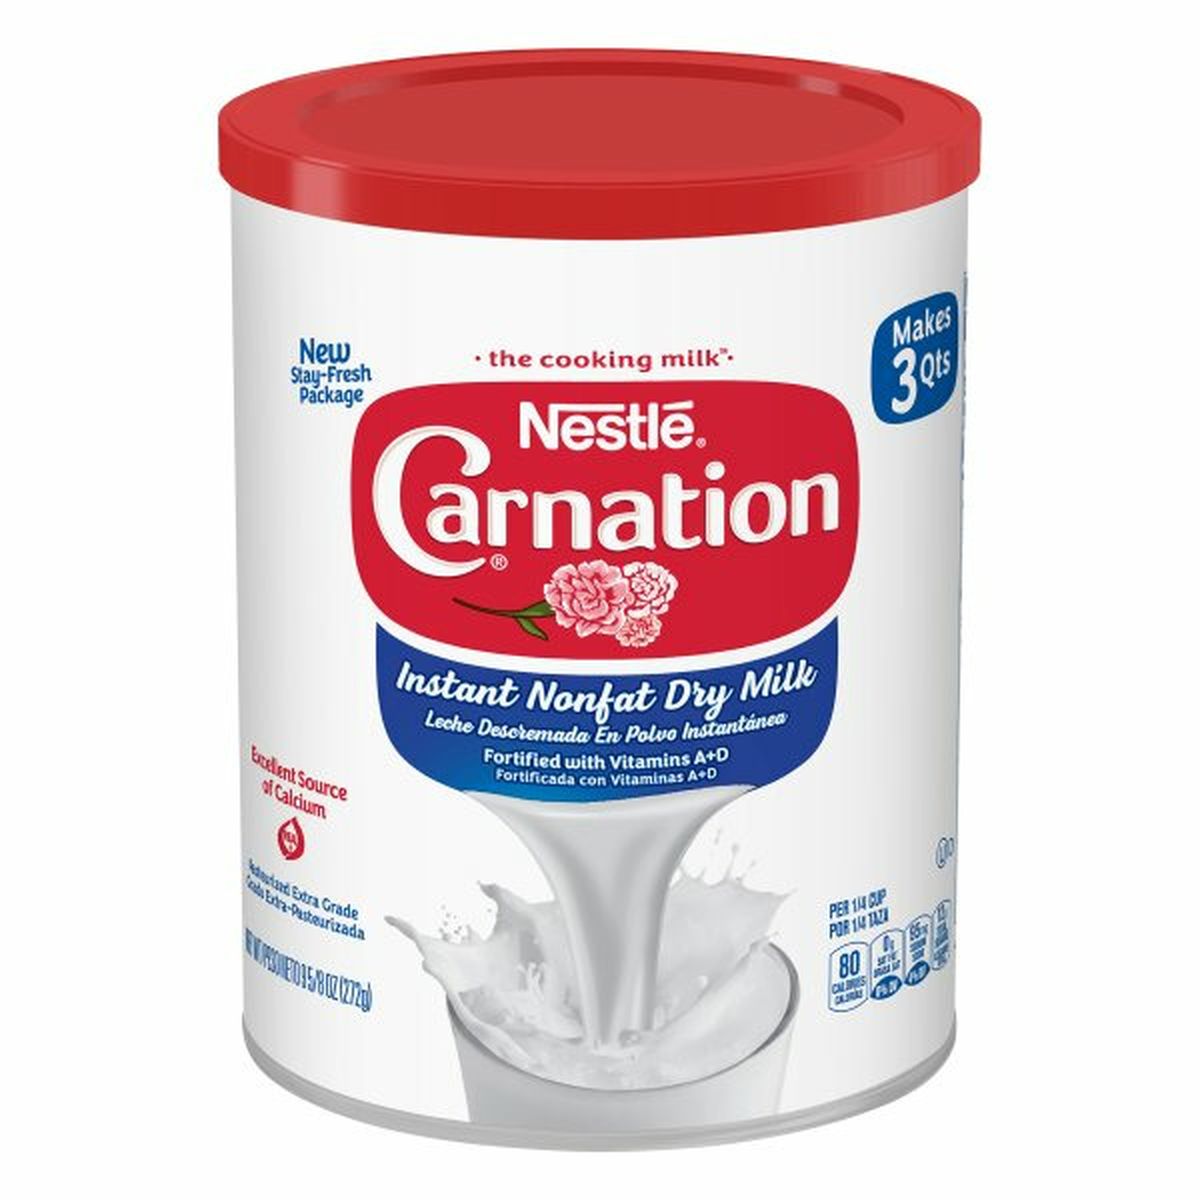 Calories in Carnation Dry Milk, Instant, Nonfat